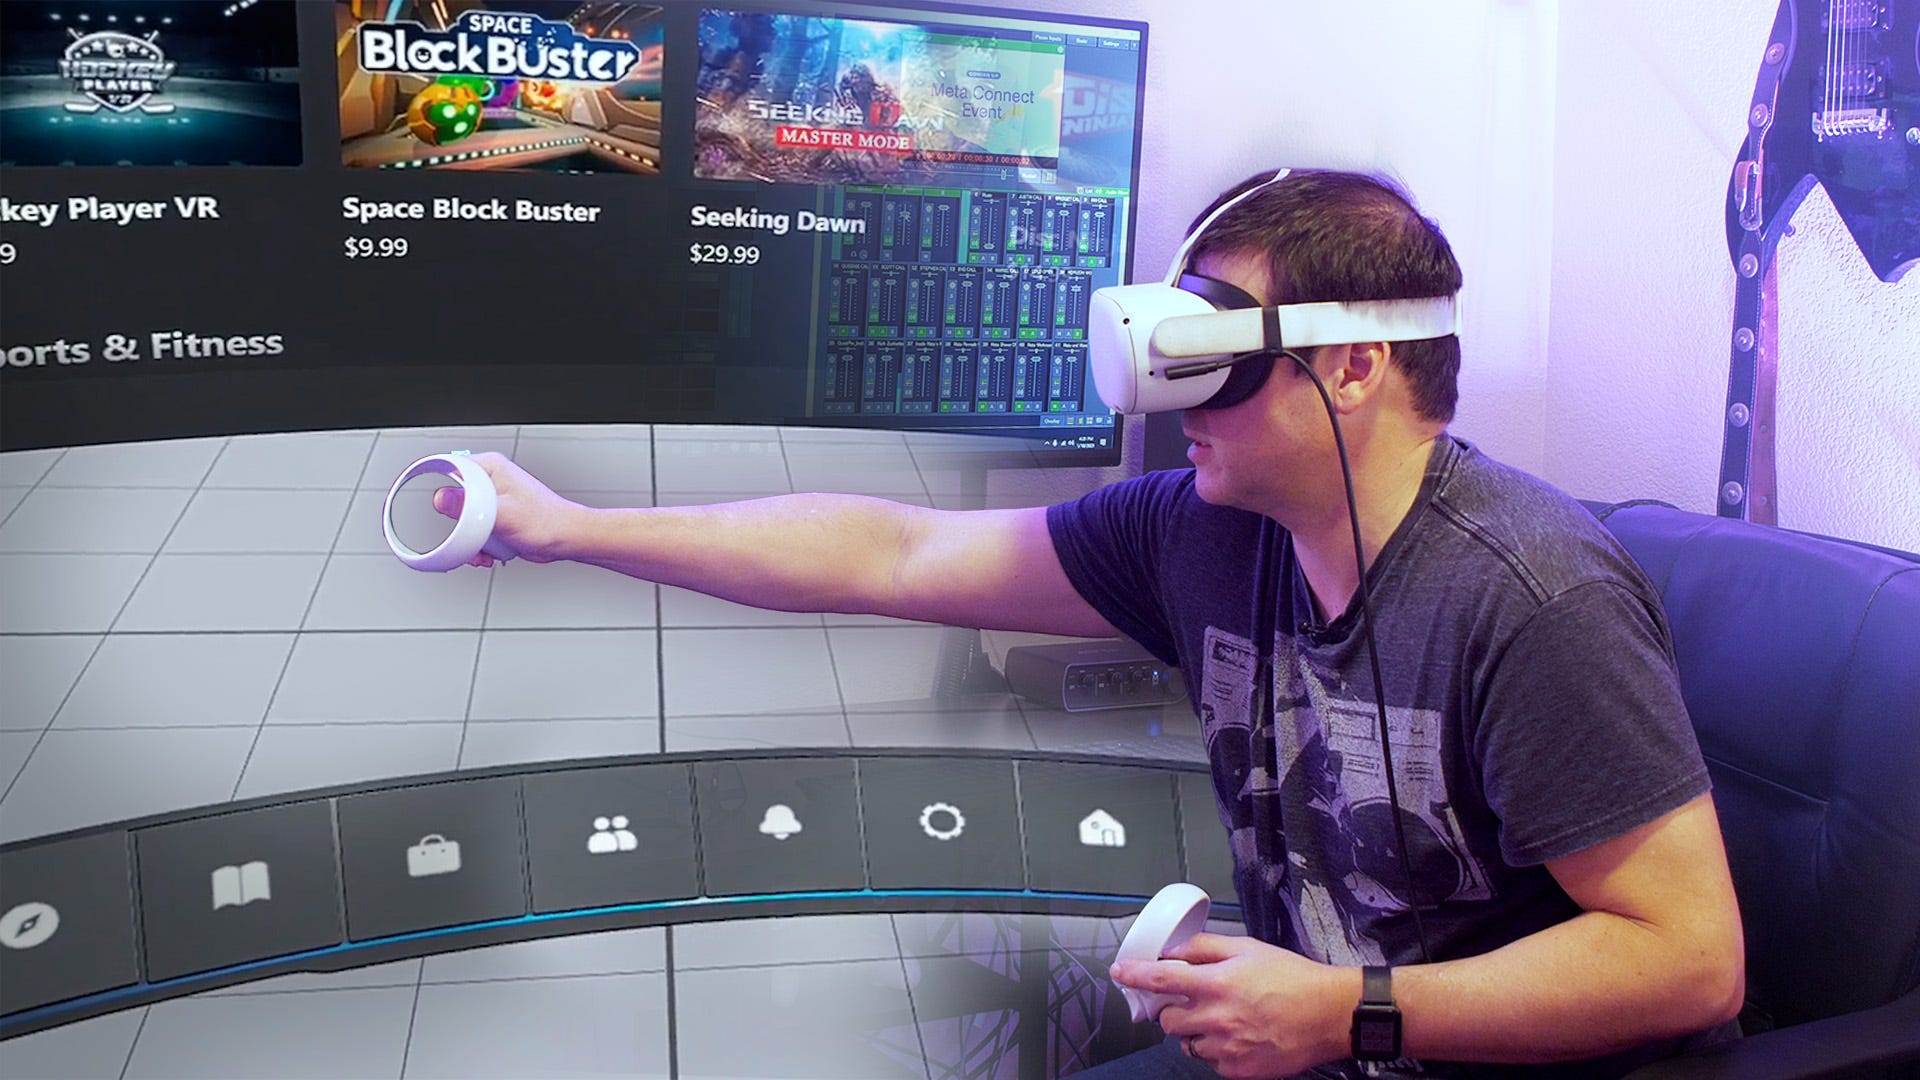 How to Get Free Games on Meta (Oculus) Quest and Quest 2